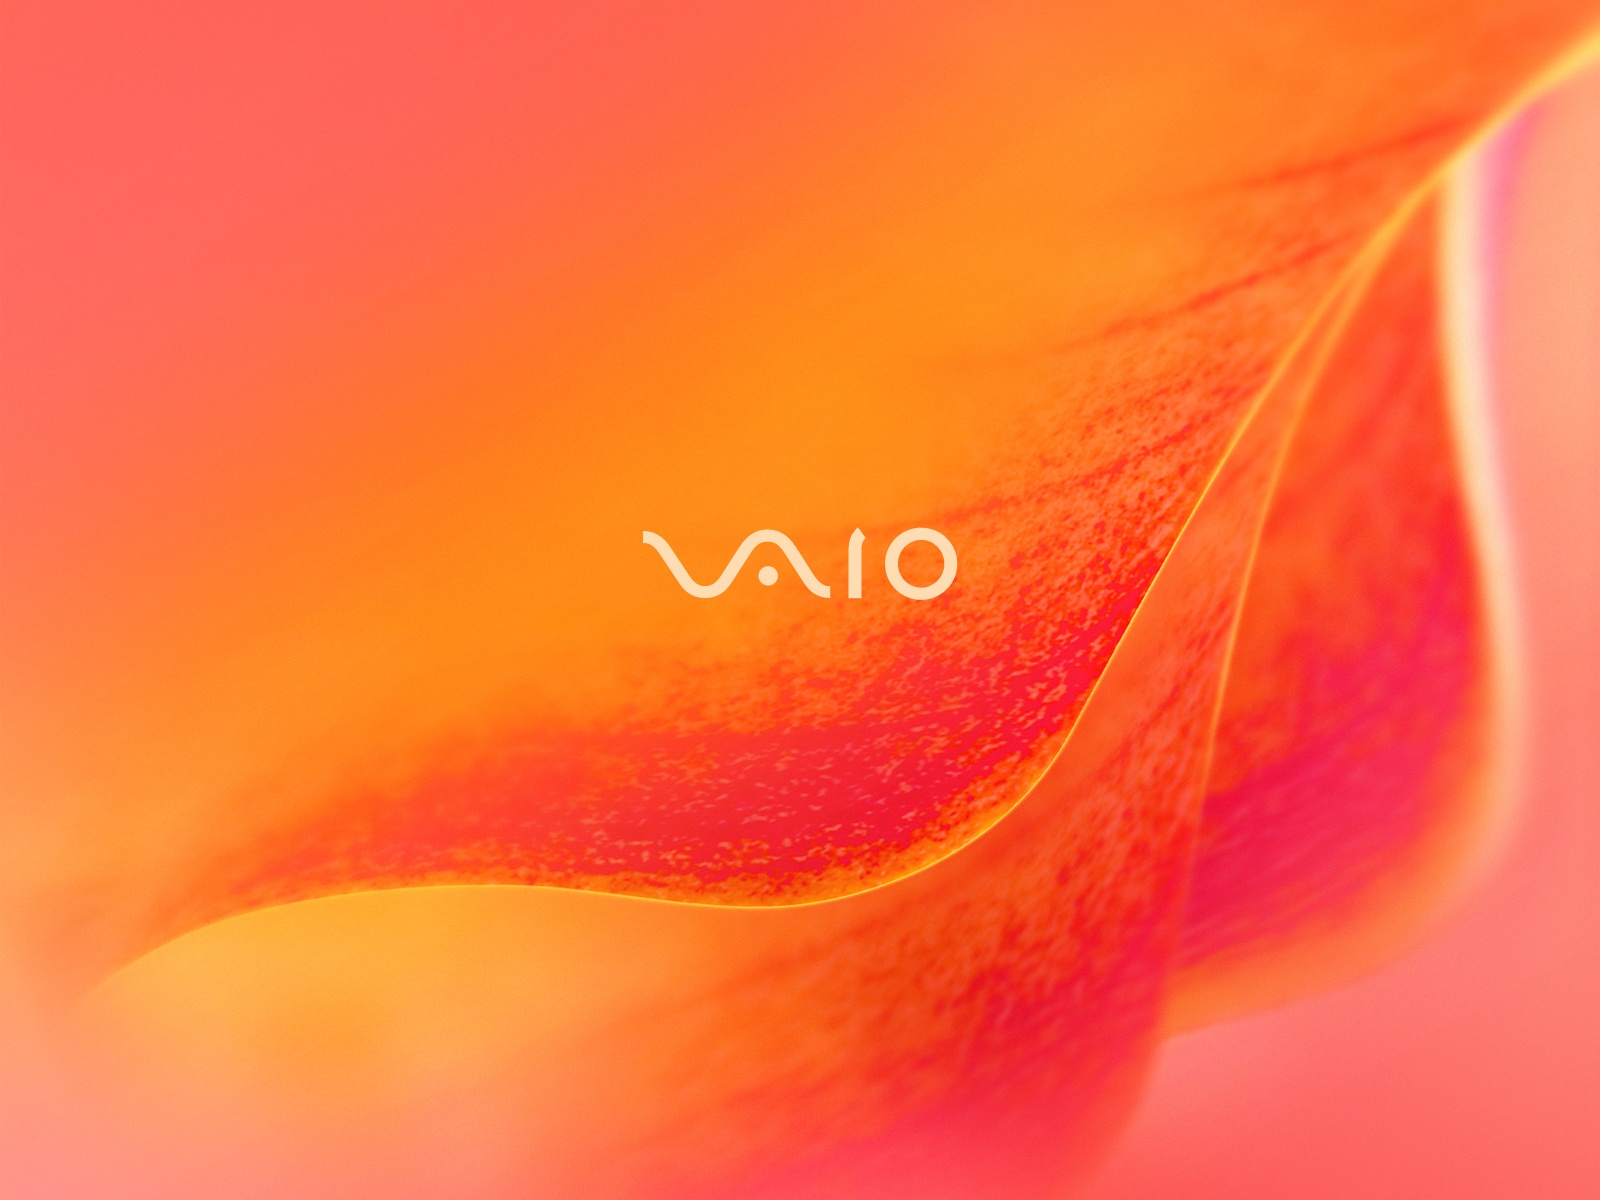 Sony Vaio 5 Wallpapers In Jpg Format For Free Download